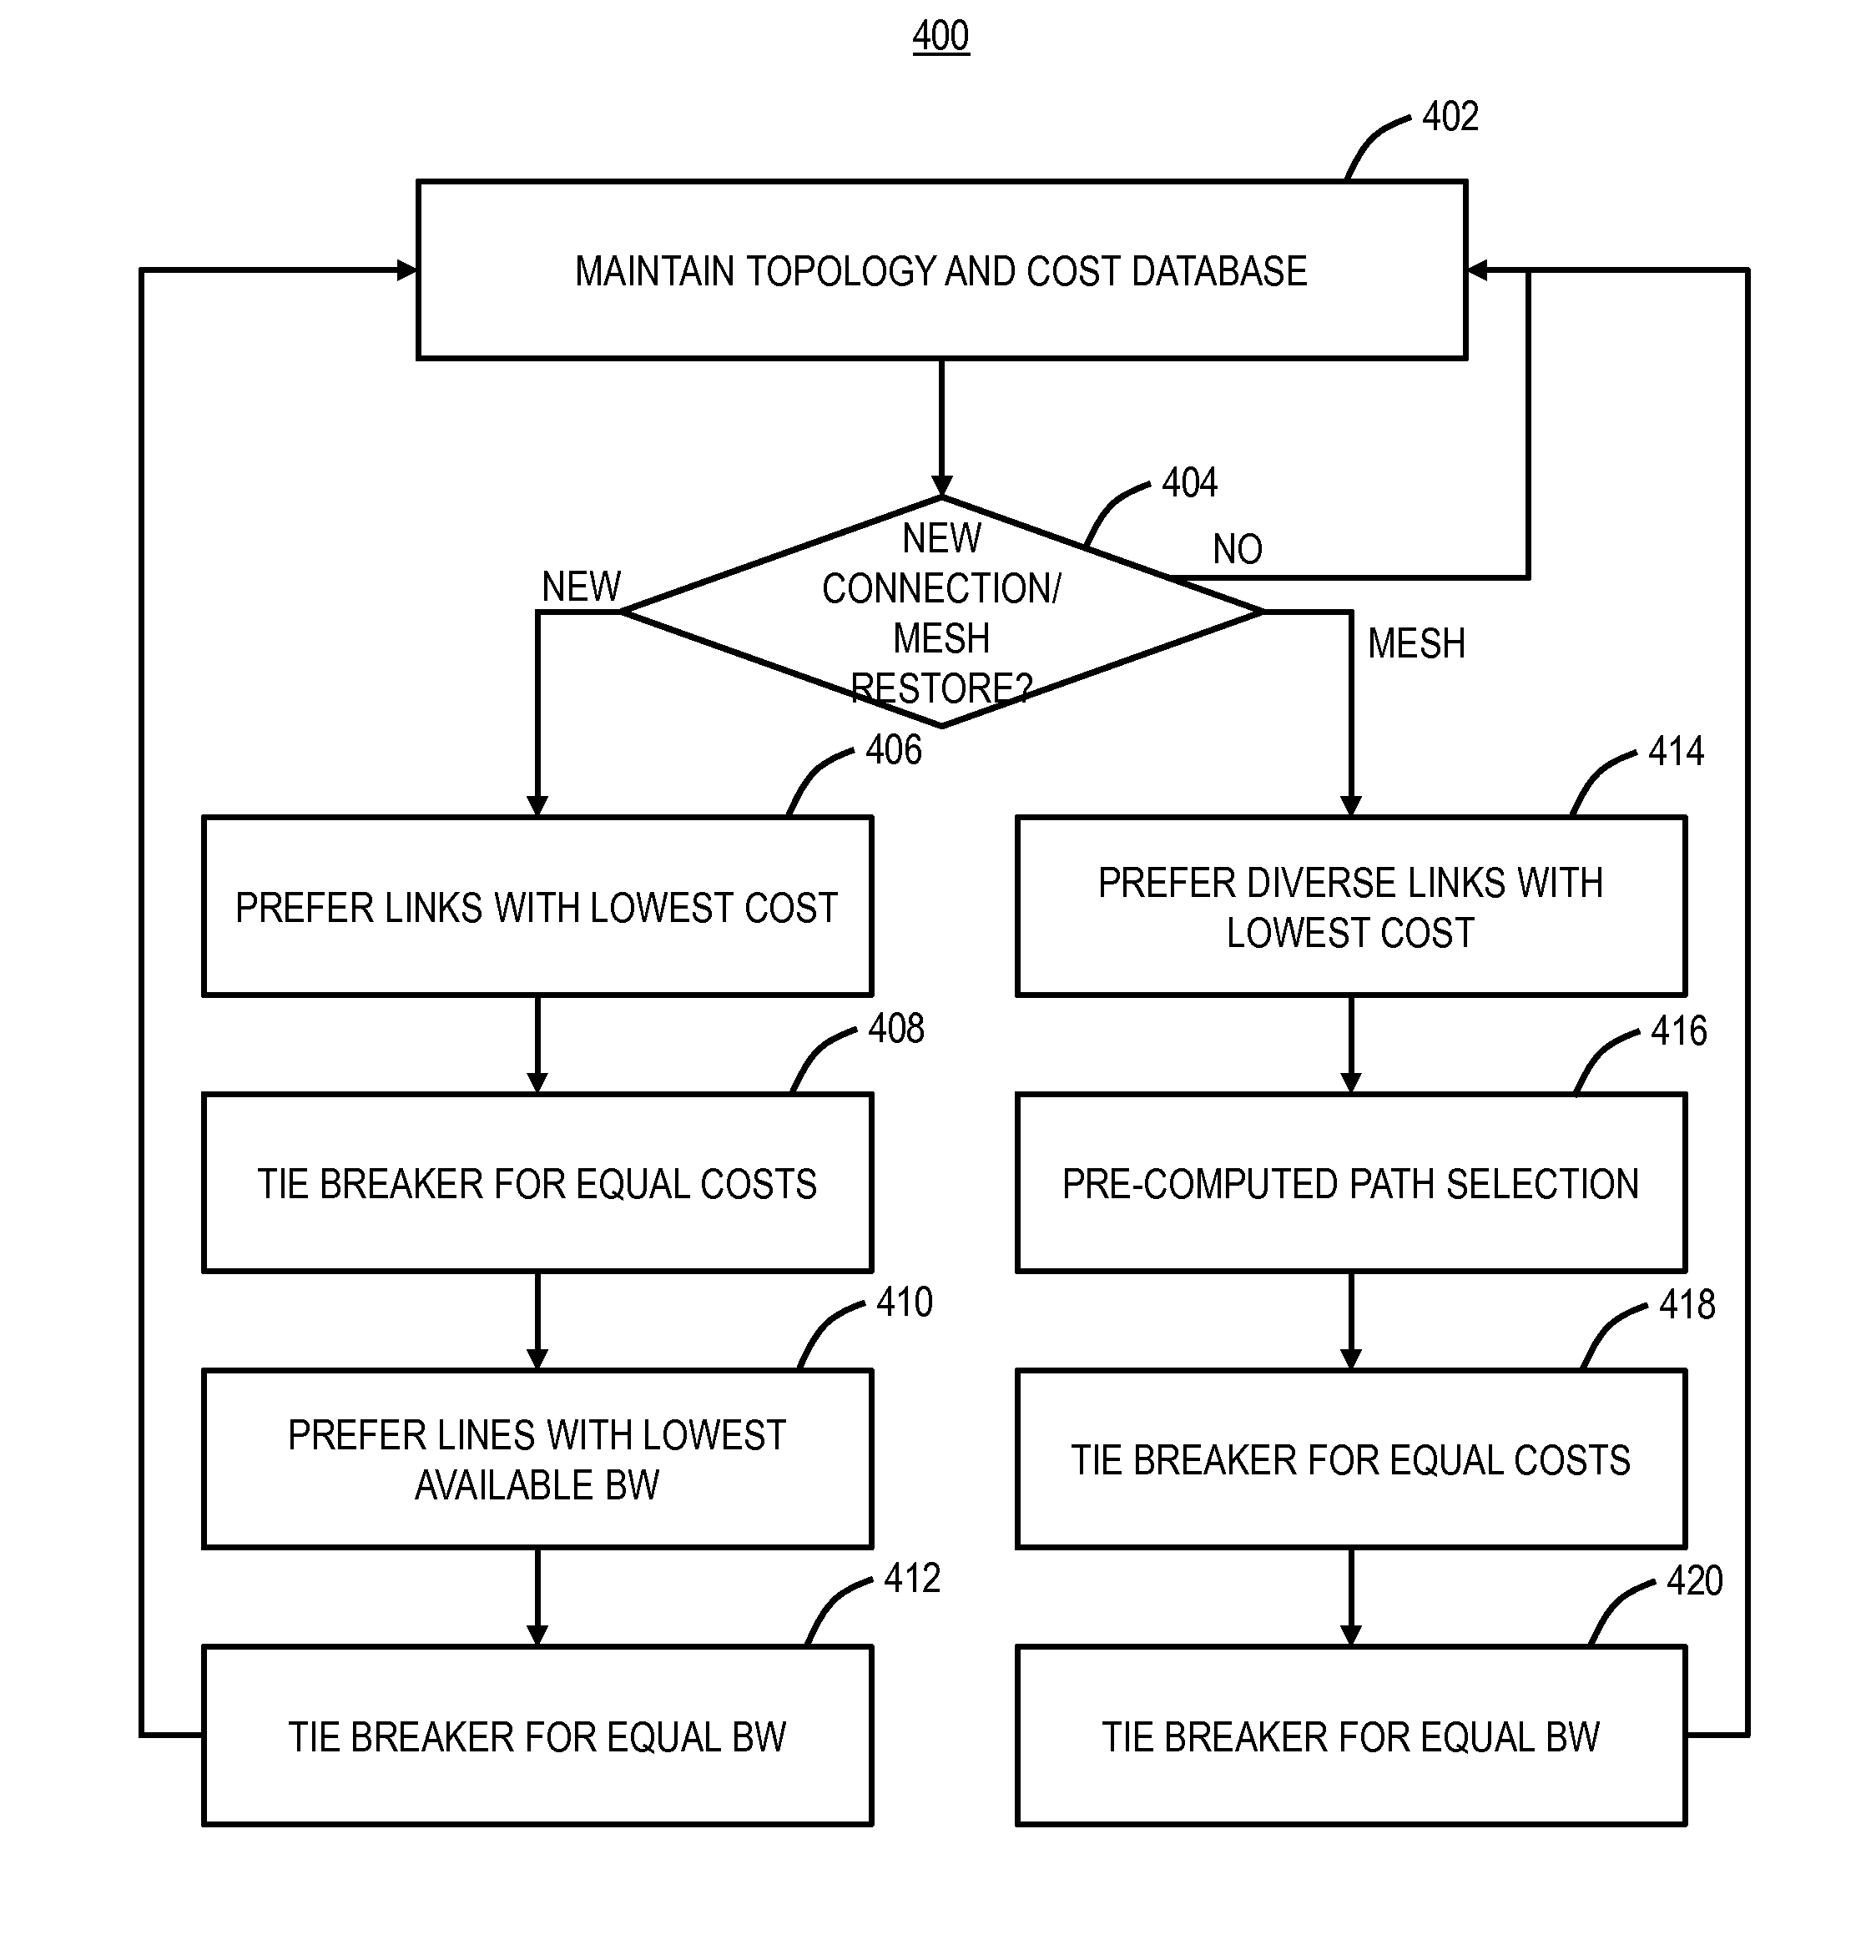 Opportunity based path computation systems and methods in constraint-based routing